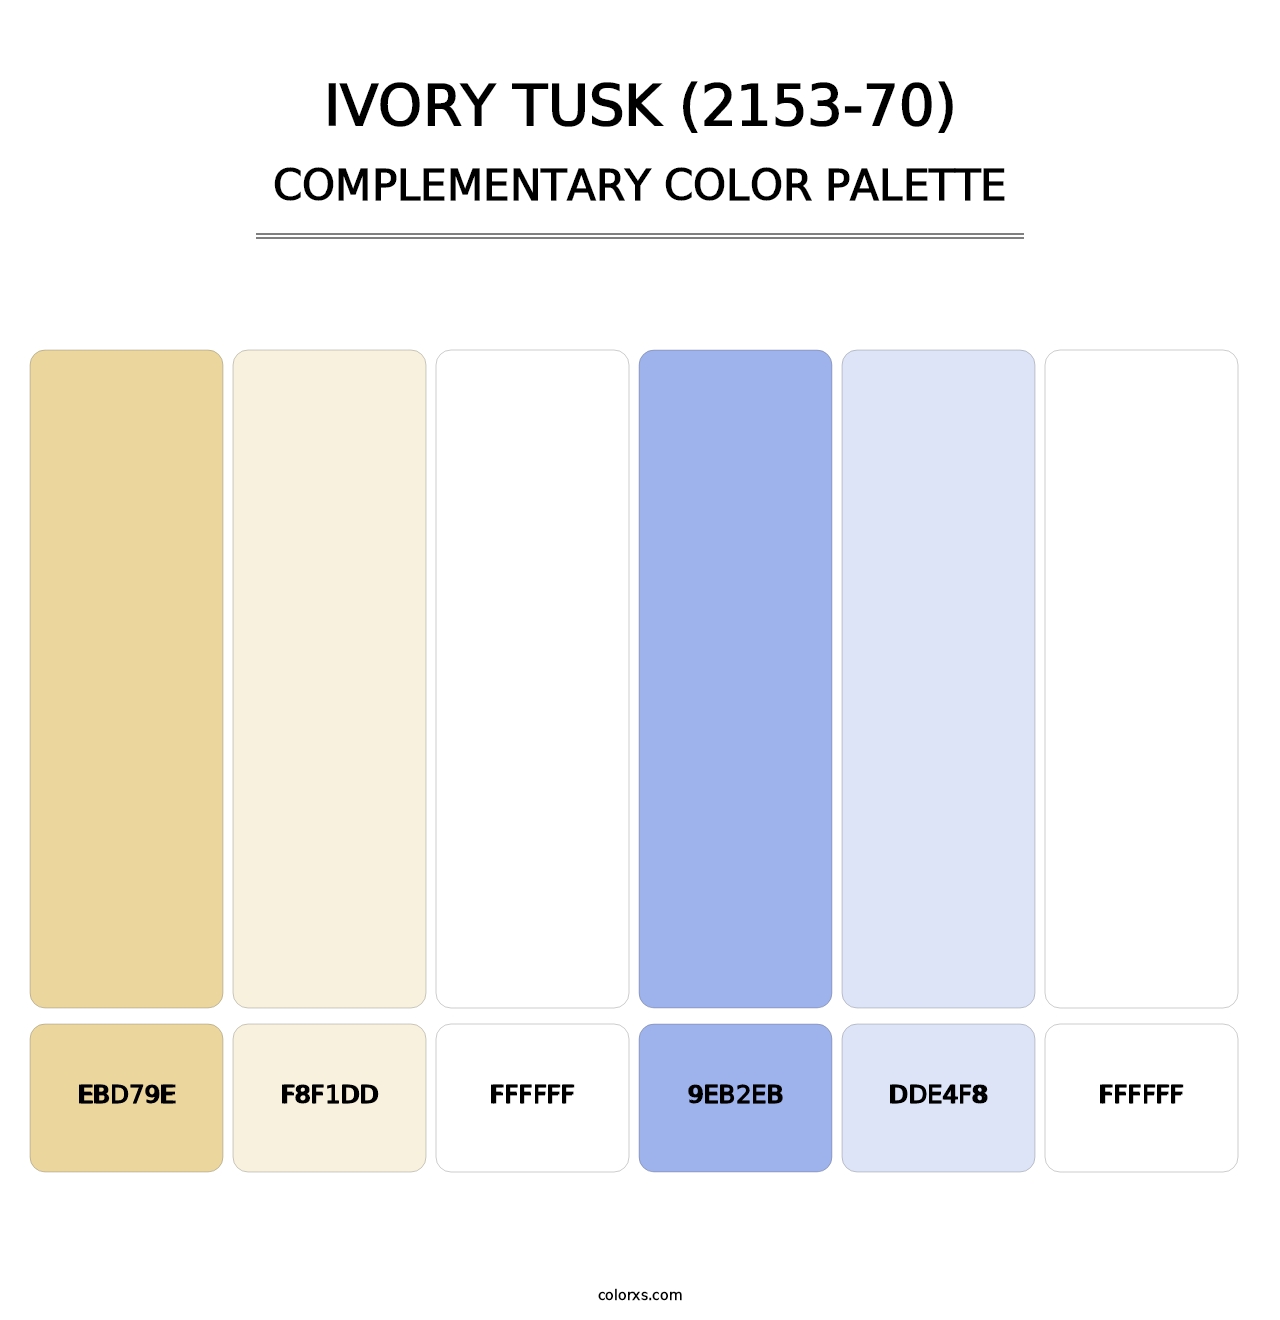 Ivory Tusk (2153-70) - Complementary Color Palette